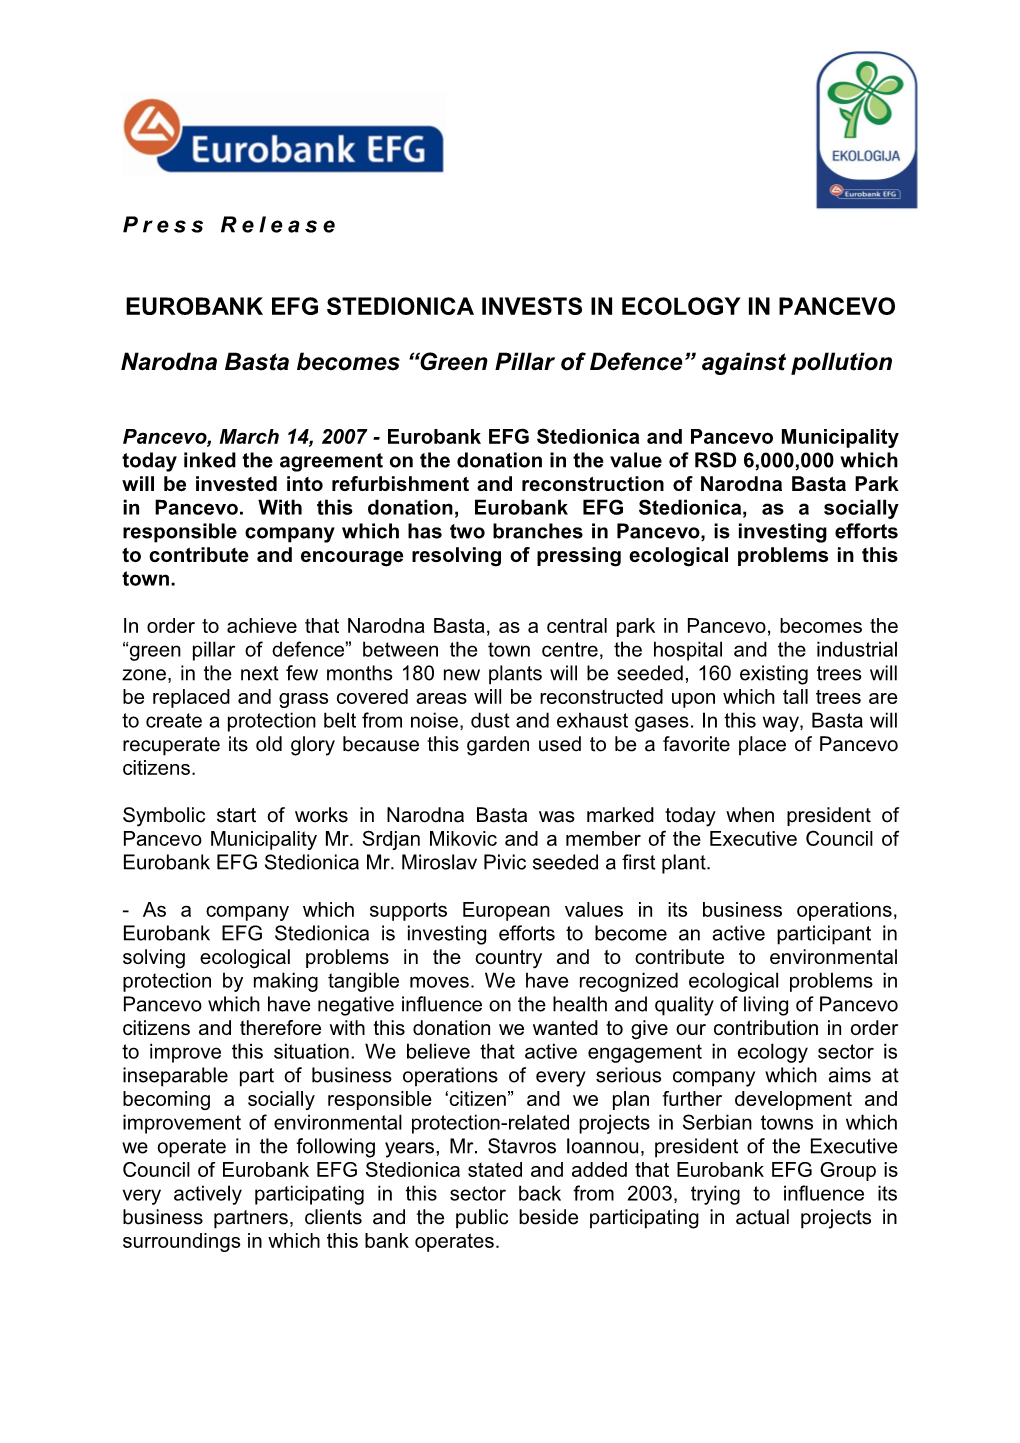 Eurobank Efg Stedionica Invests in Ecology in Pancevo